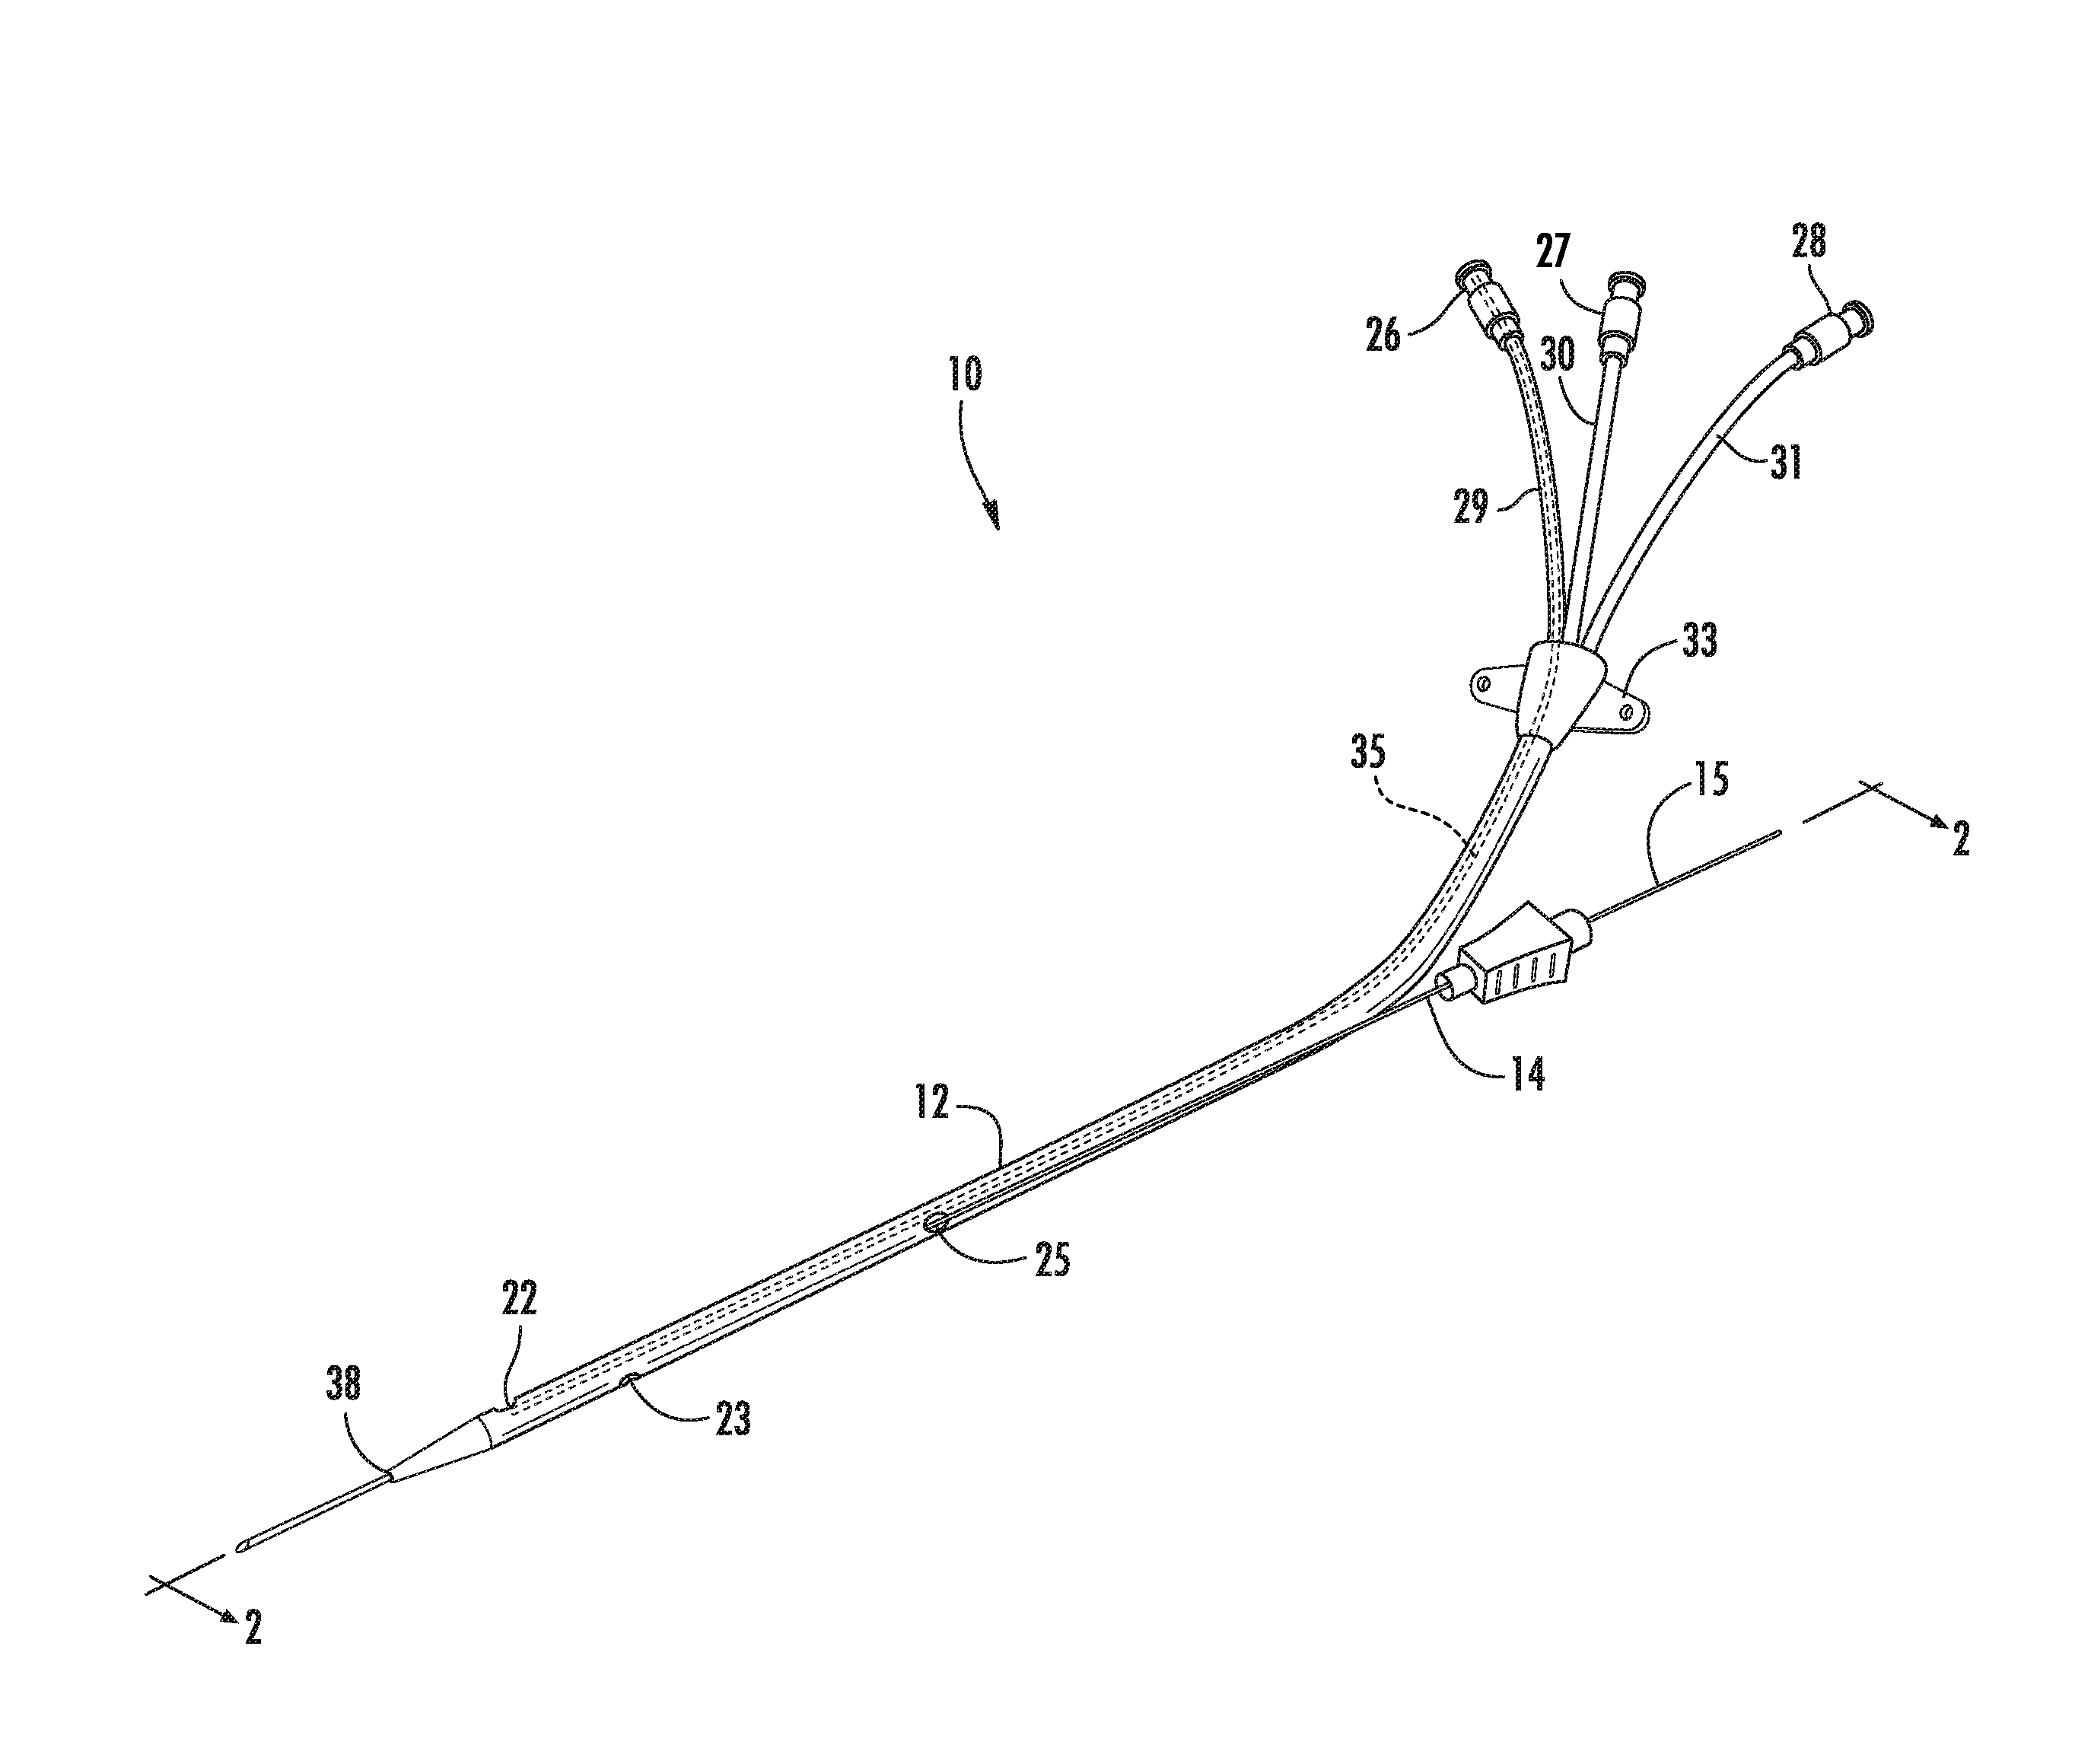 Rapid Insertion Integrated Catheter and Method of Using an Integrated Catheter